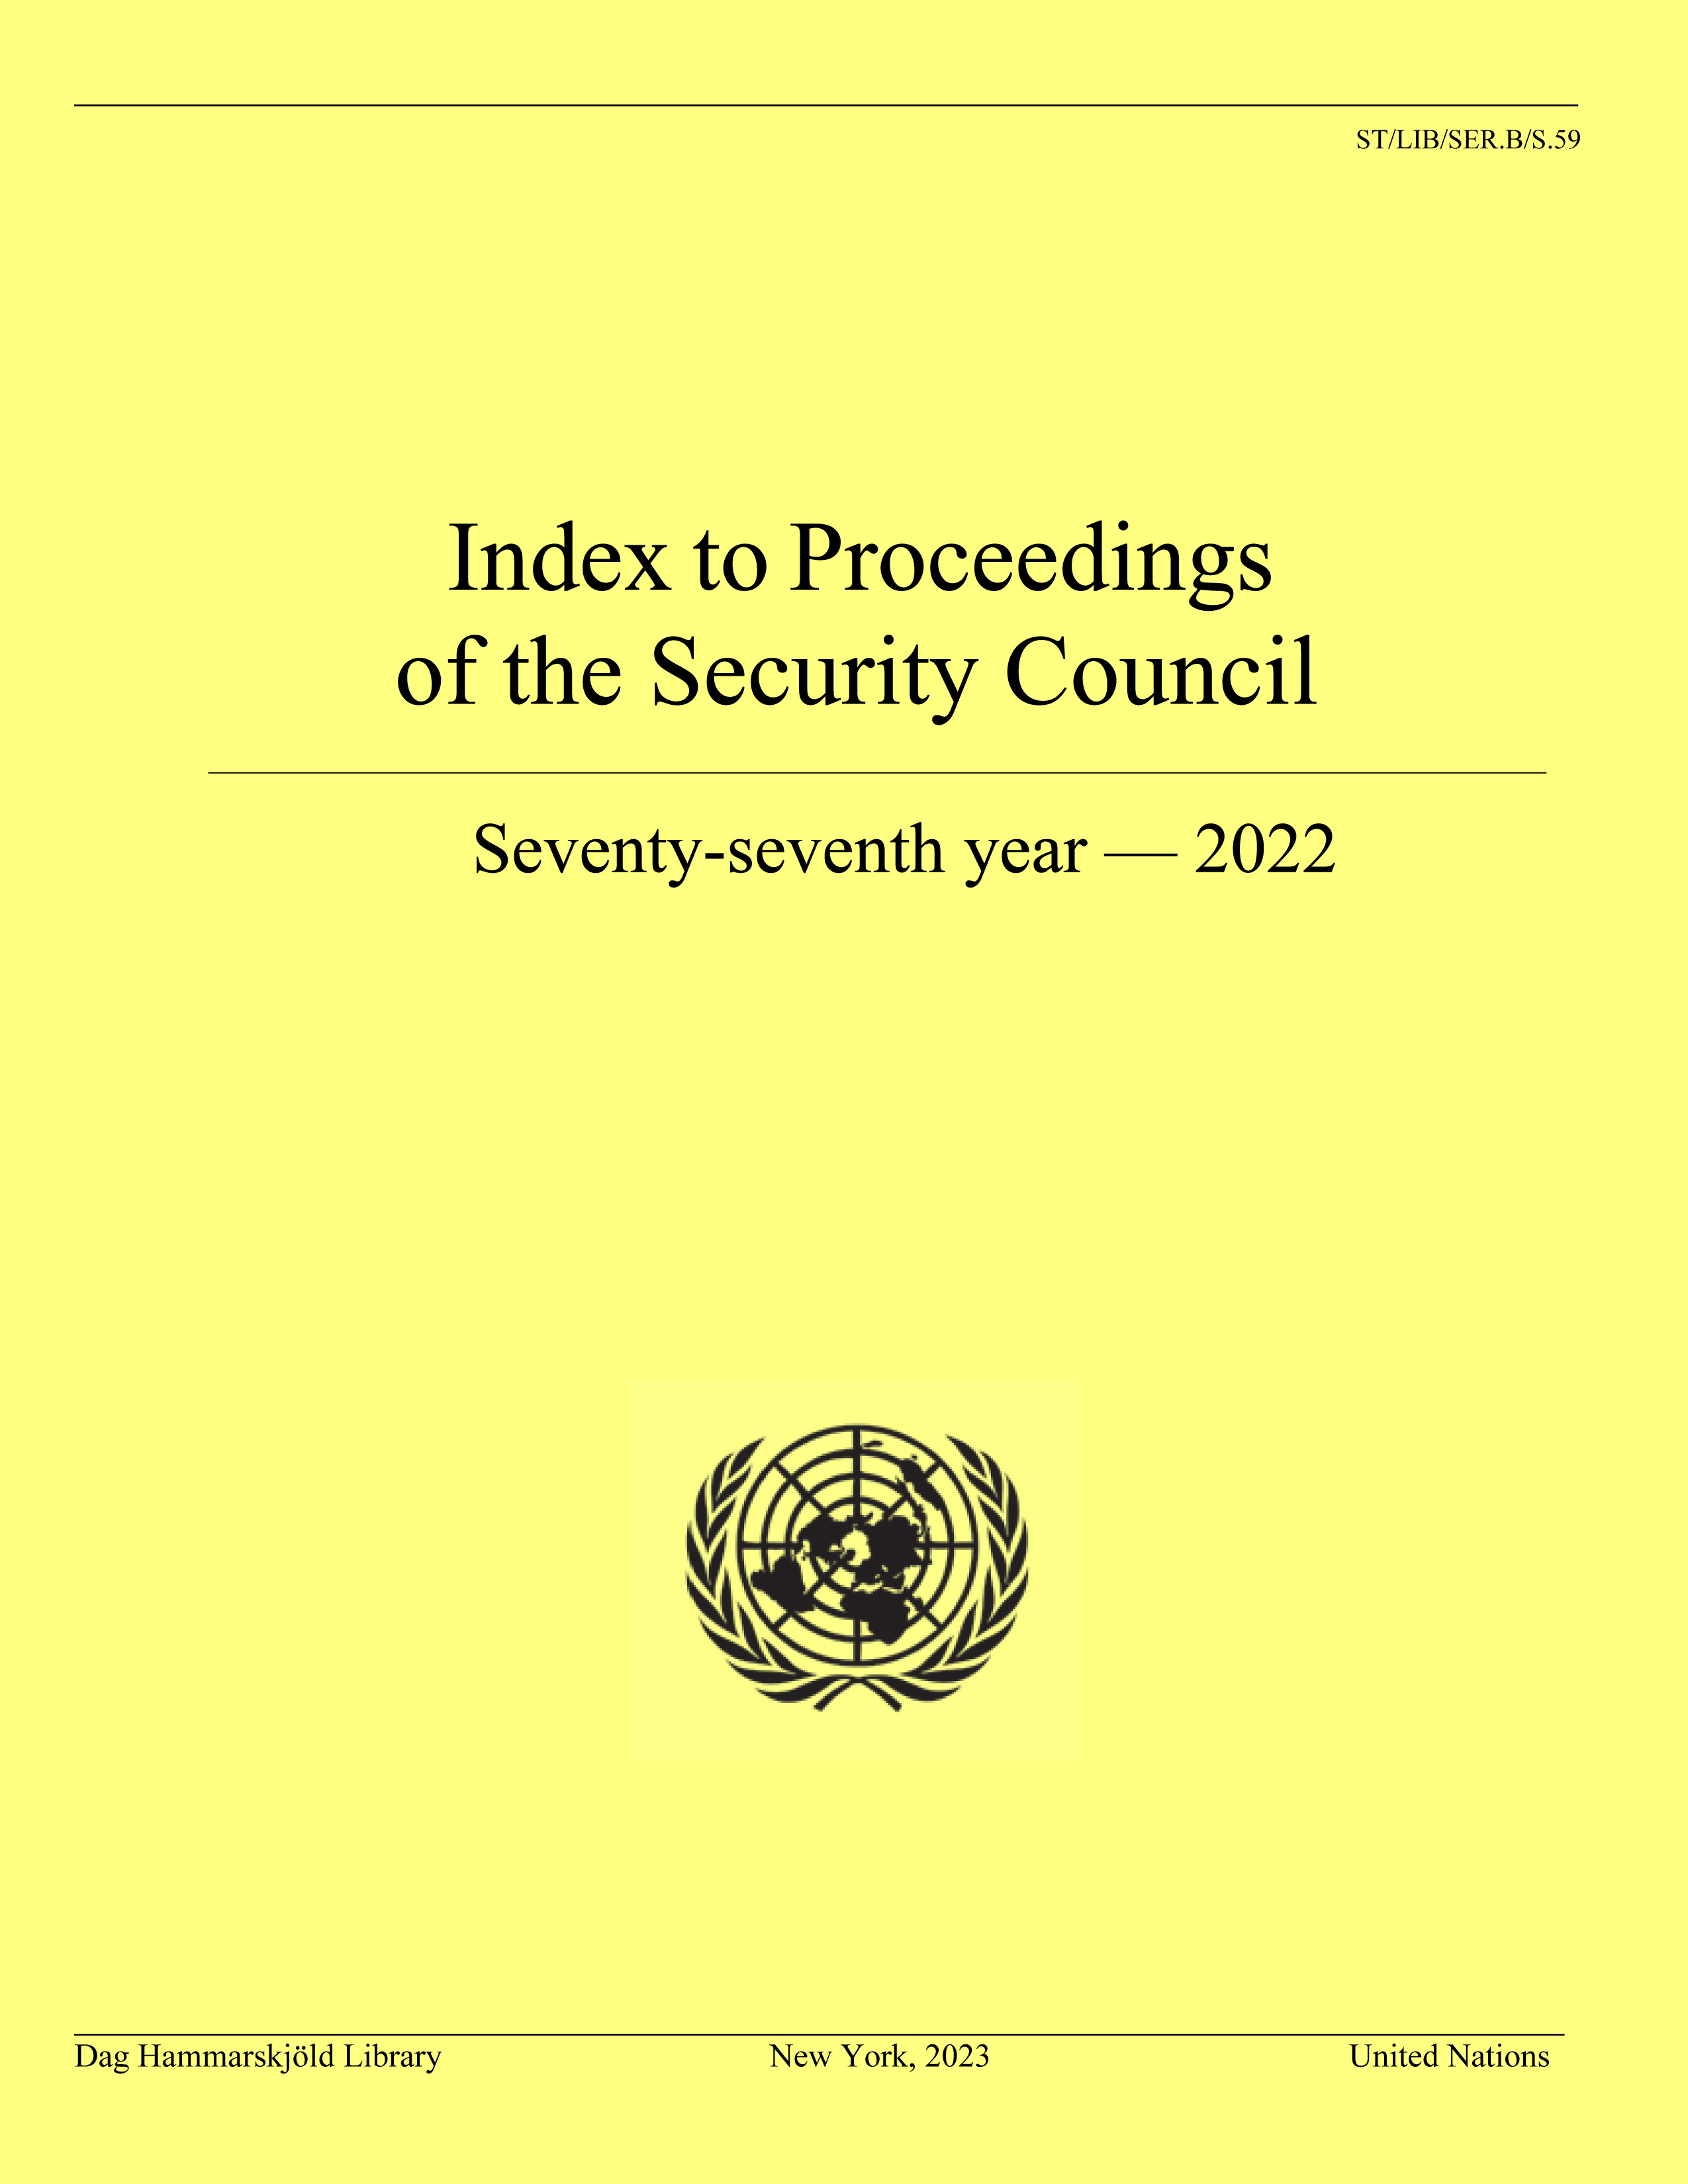 image of Index to Proceedings of the Security Council: Seventy-seventh Year, 2022